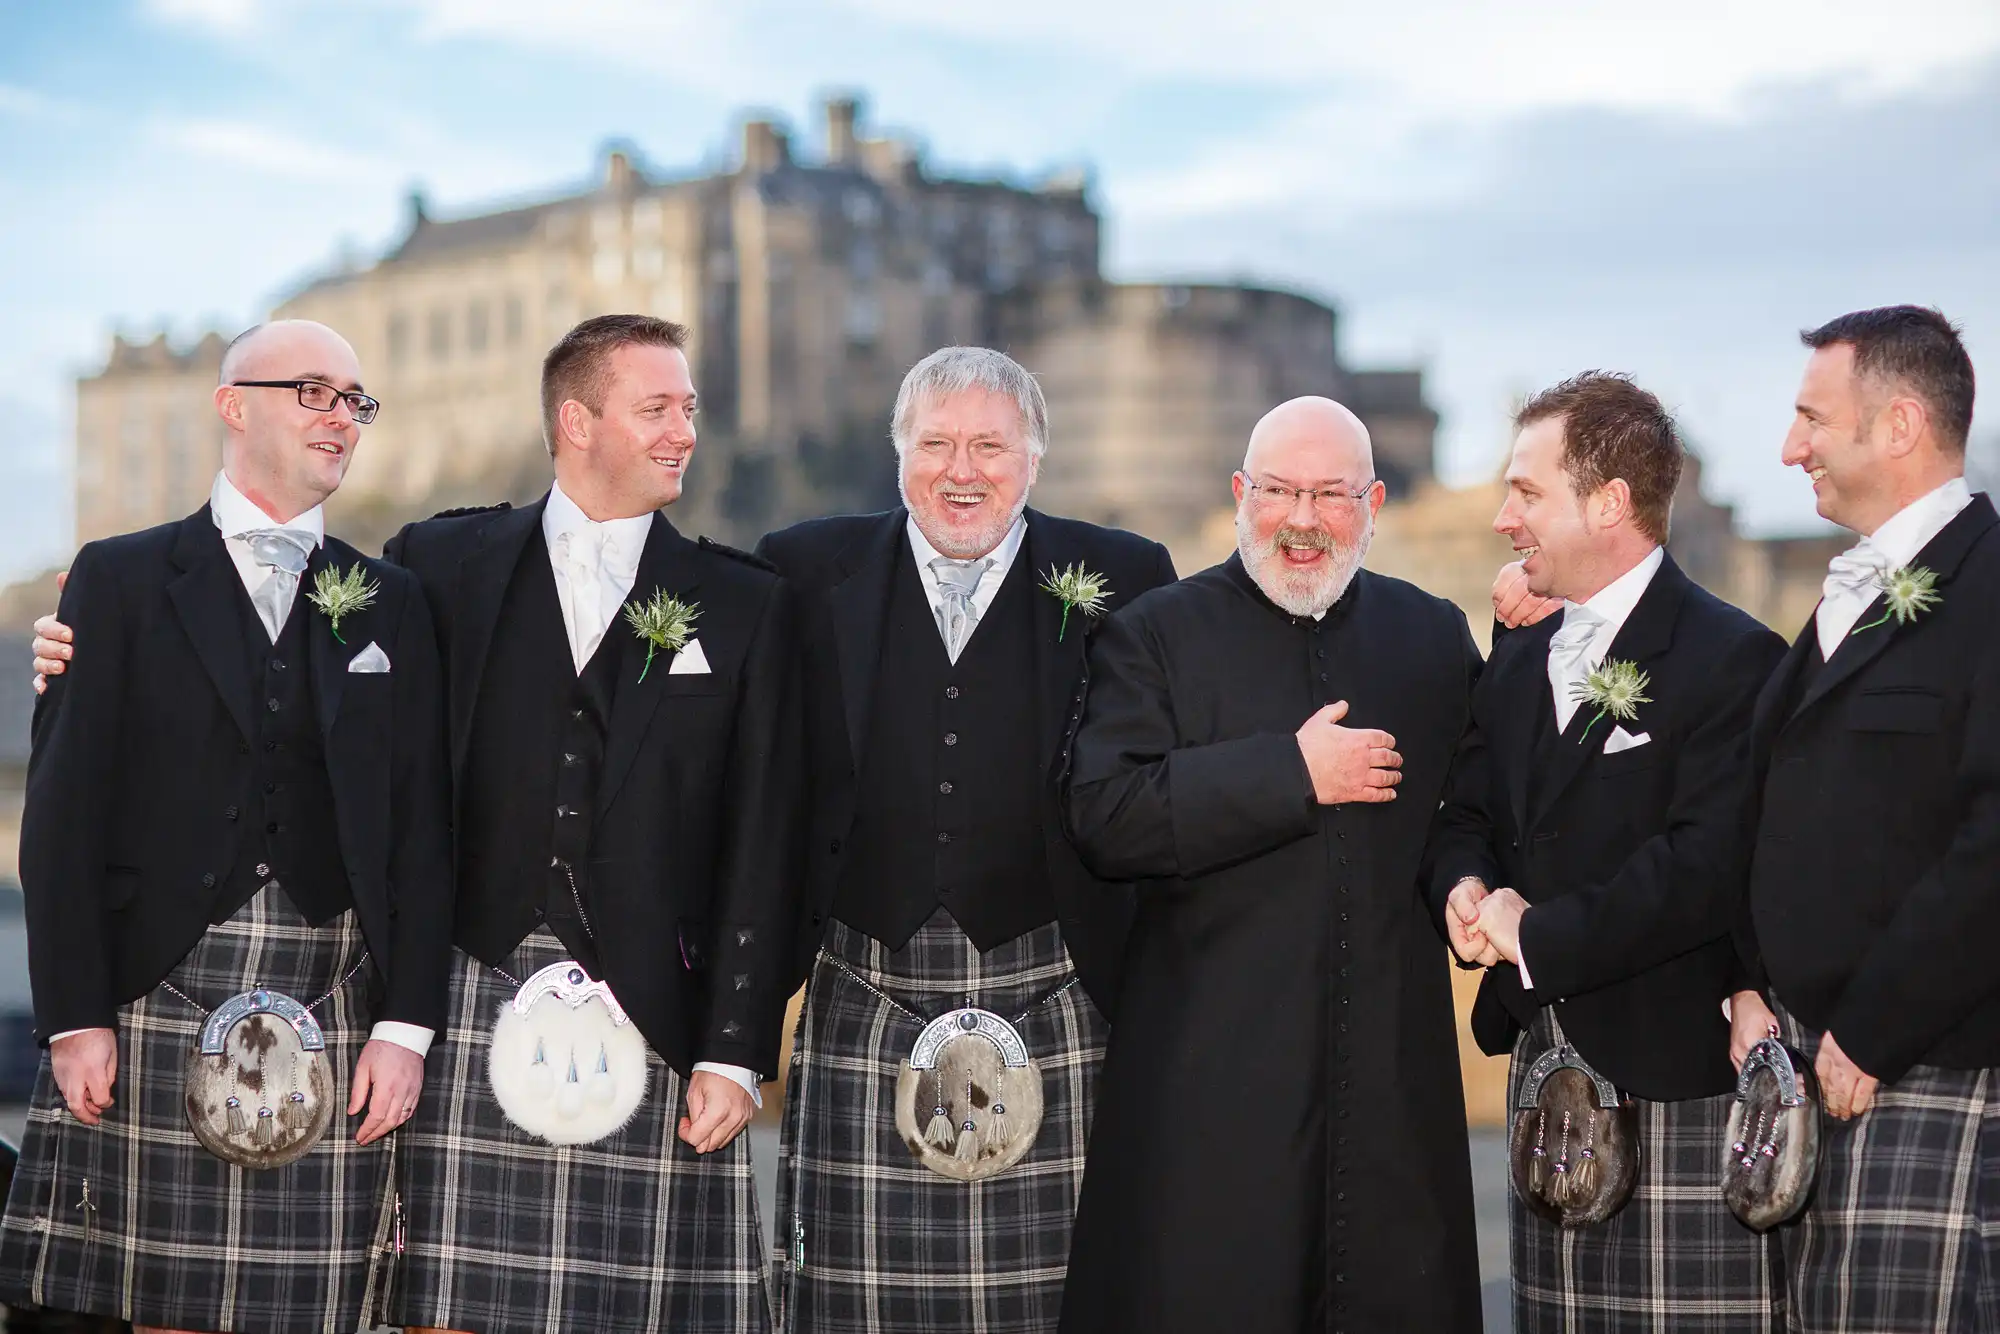 Group of six men in traditional scottish kilts and jackets, smiling and interacting happily, with a castle in the background.